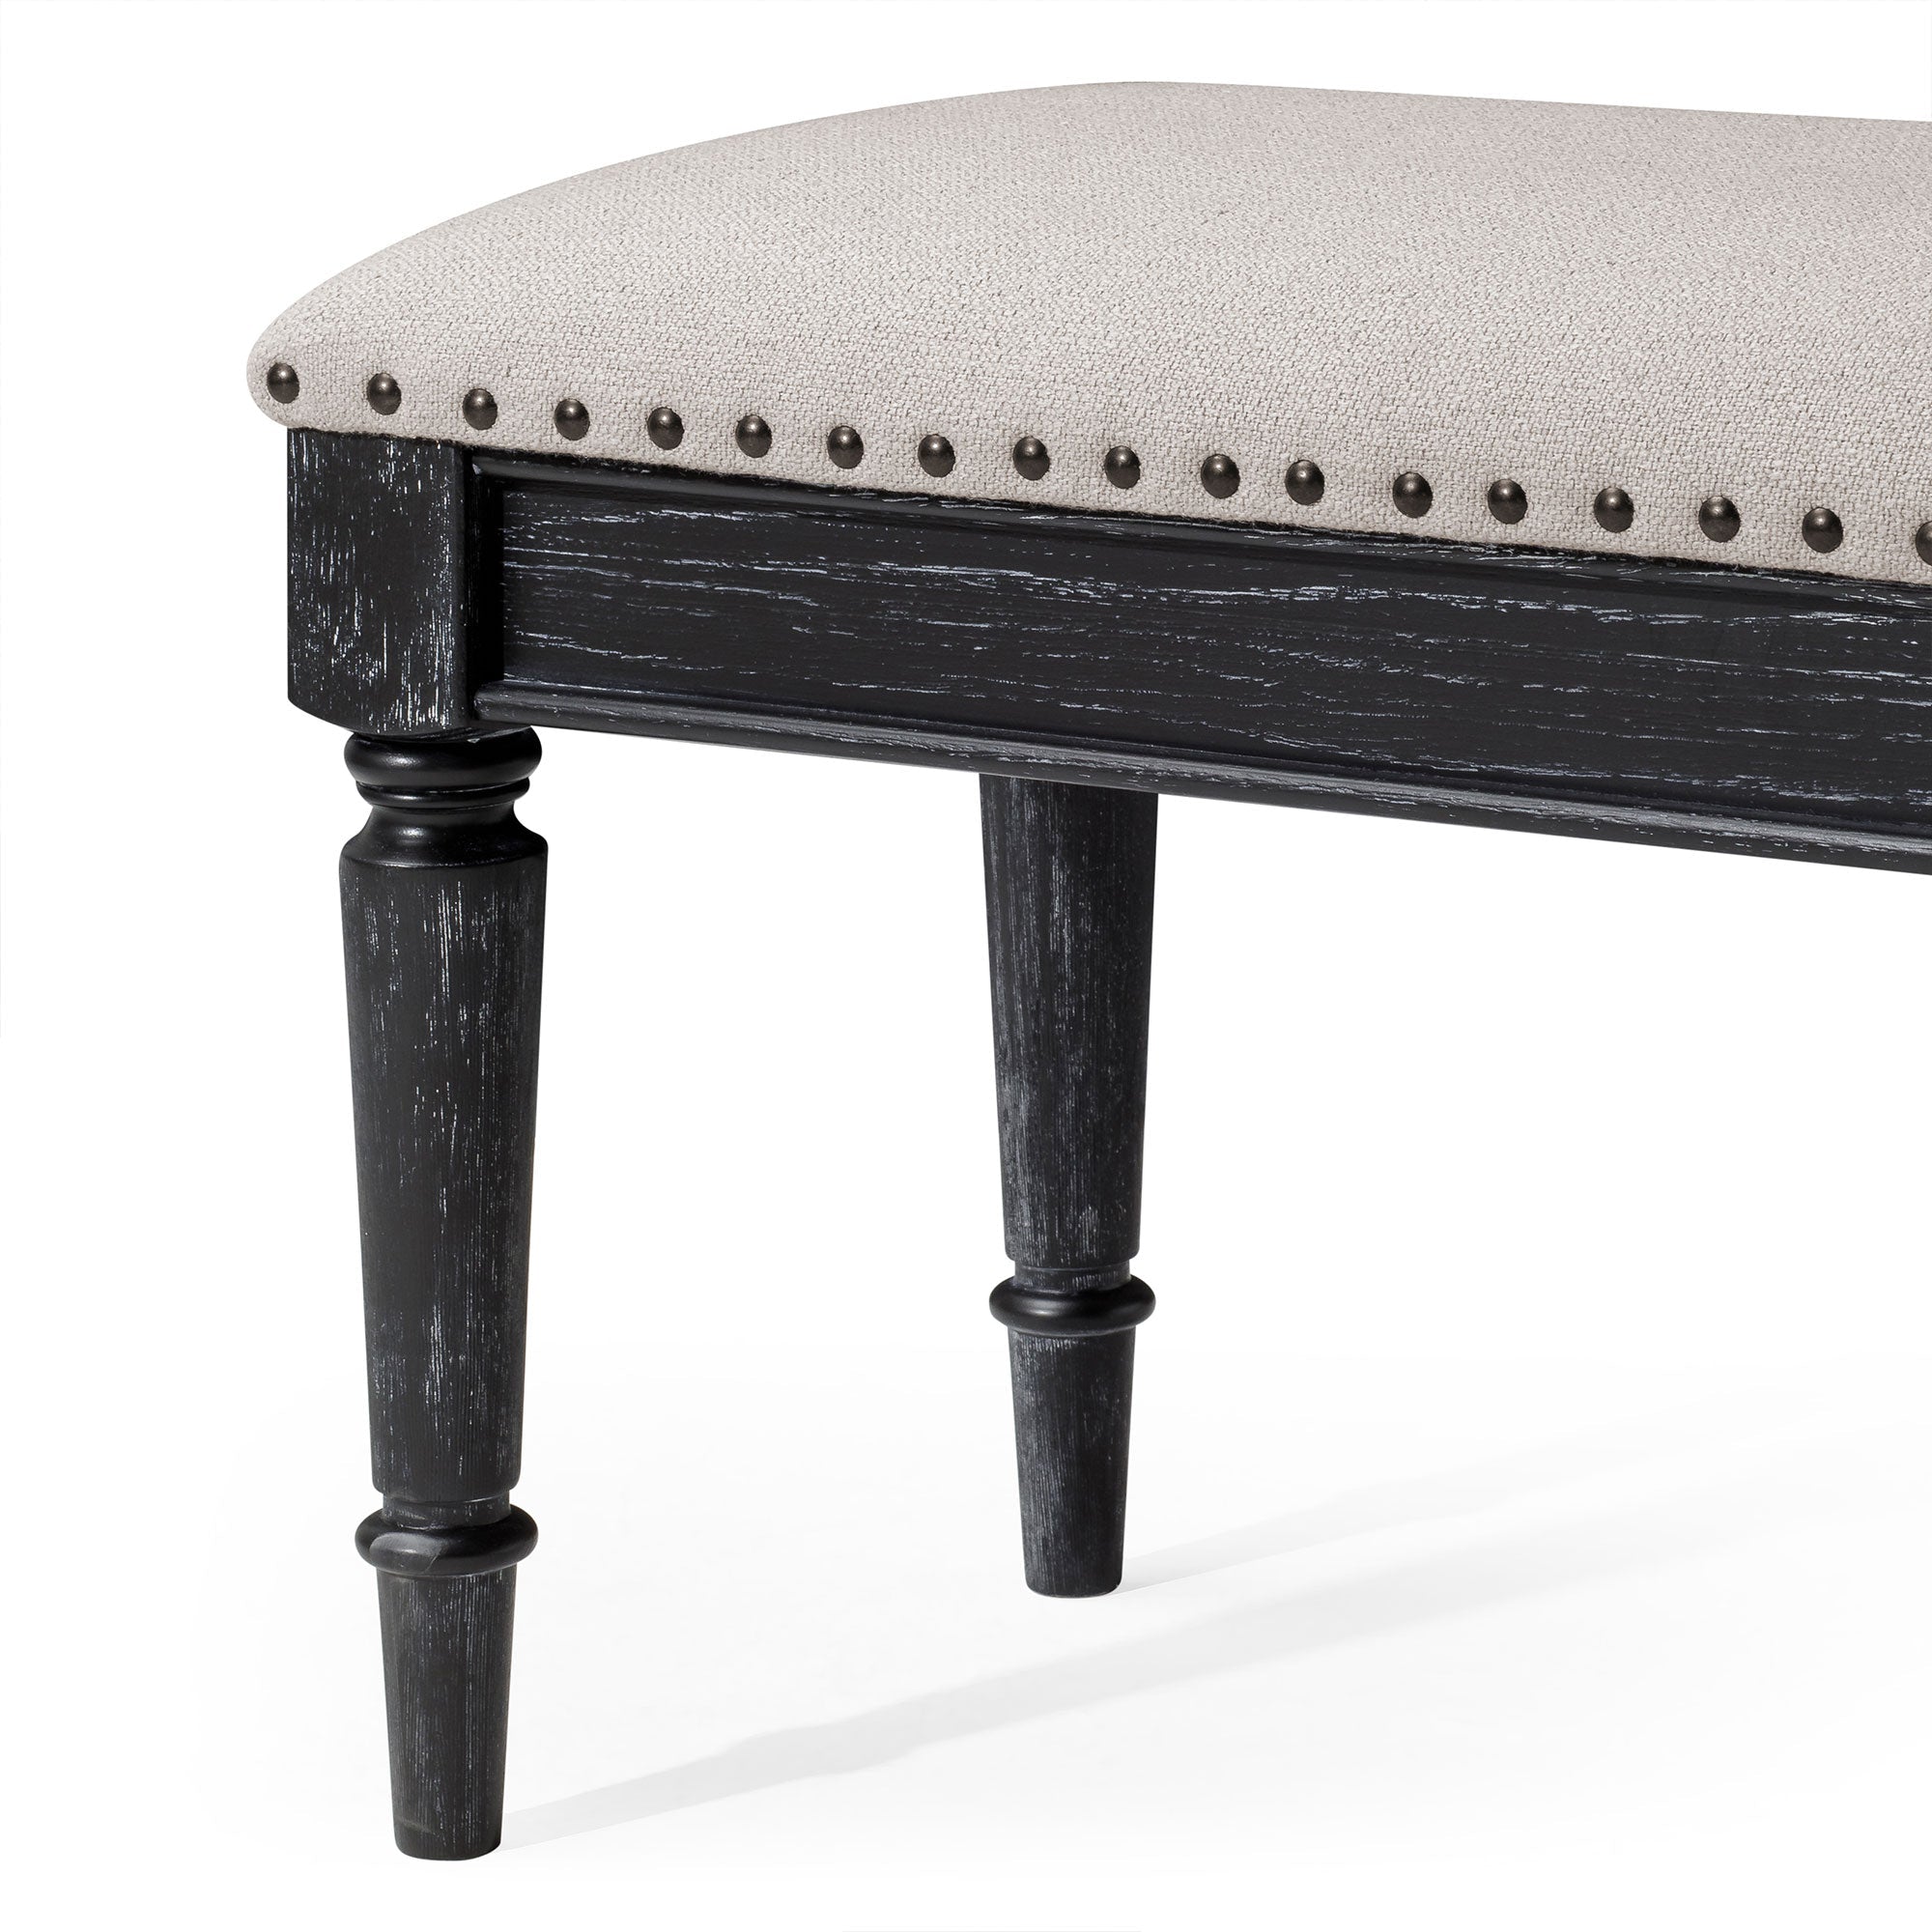 Elizabeth Classical Upholstered Wooden Bench in Antiqued Black Finish in Ottomans & Benches by Maven Lane